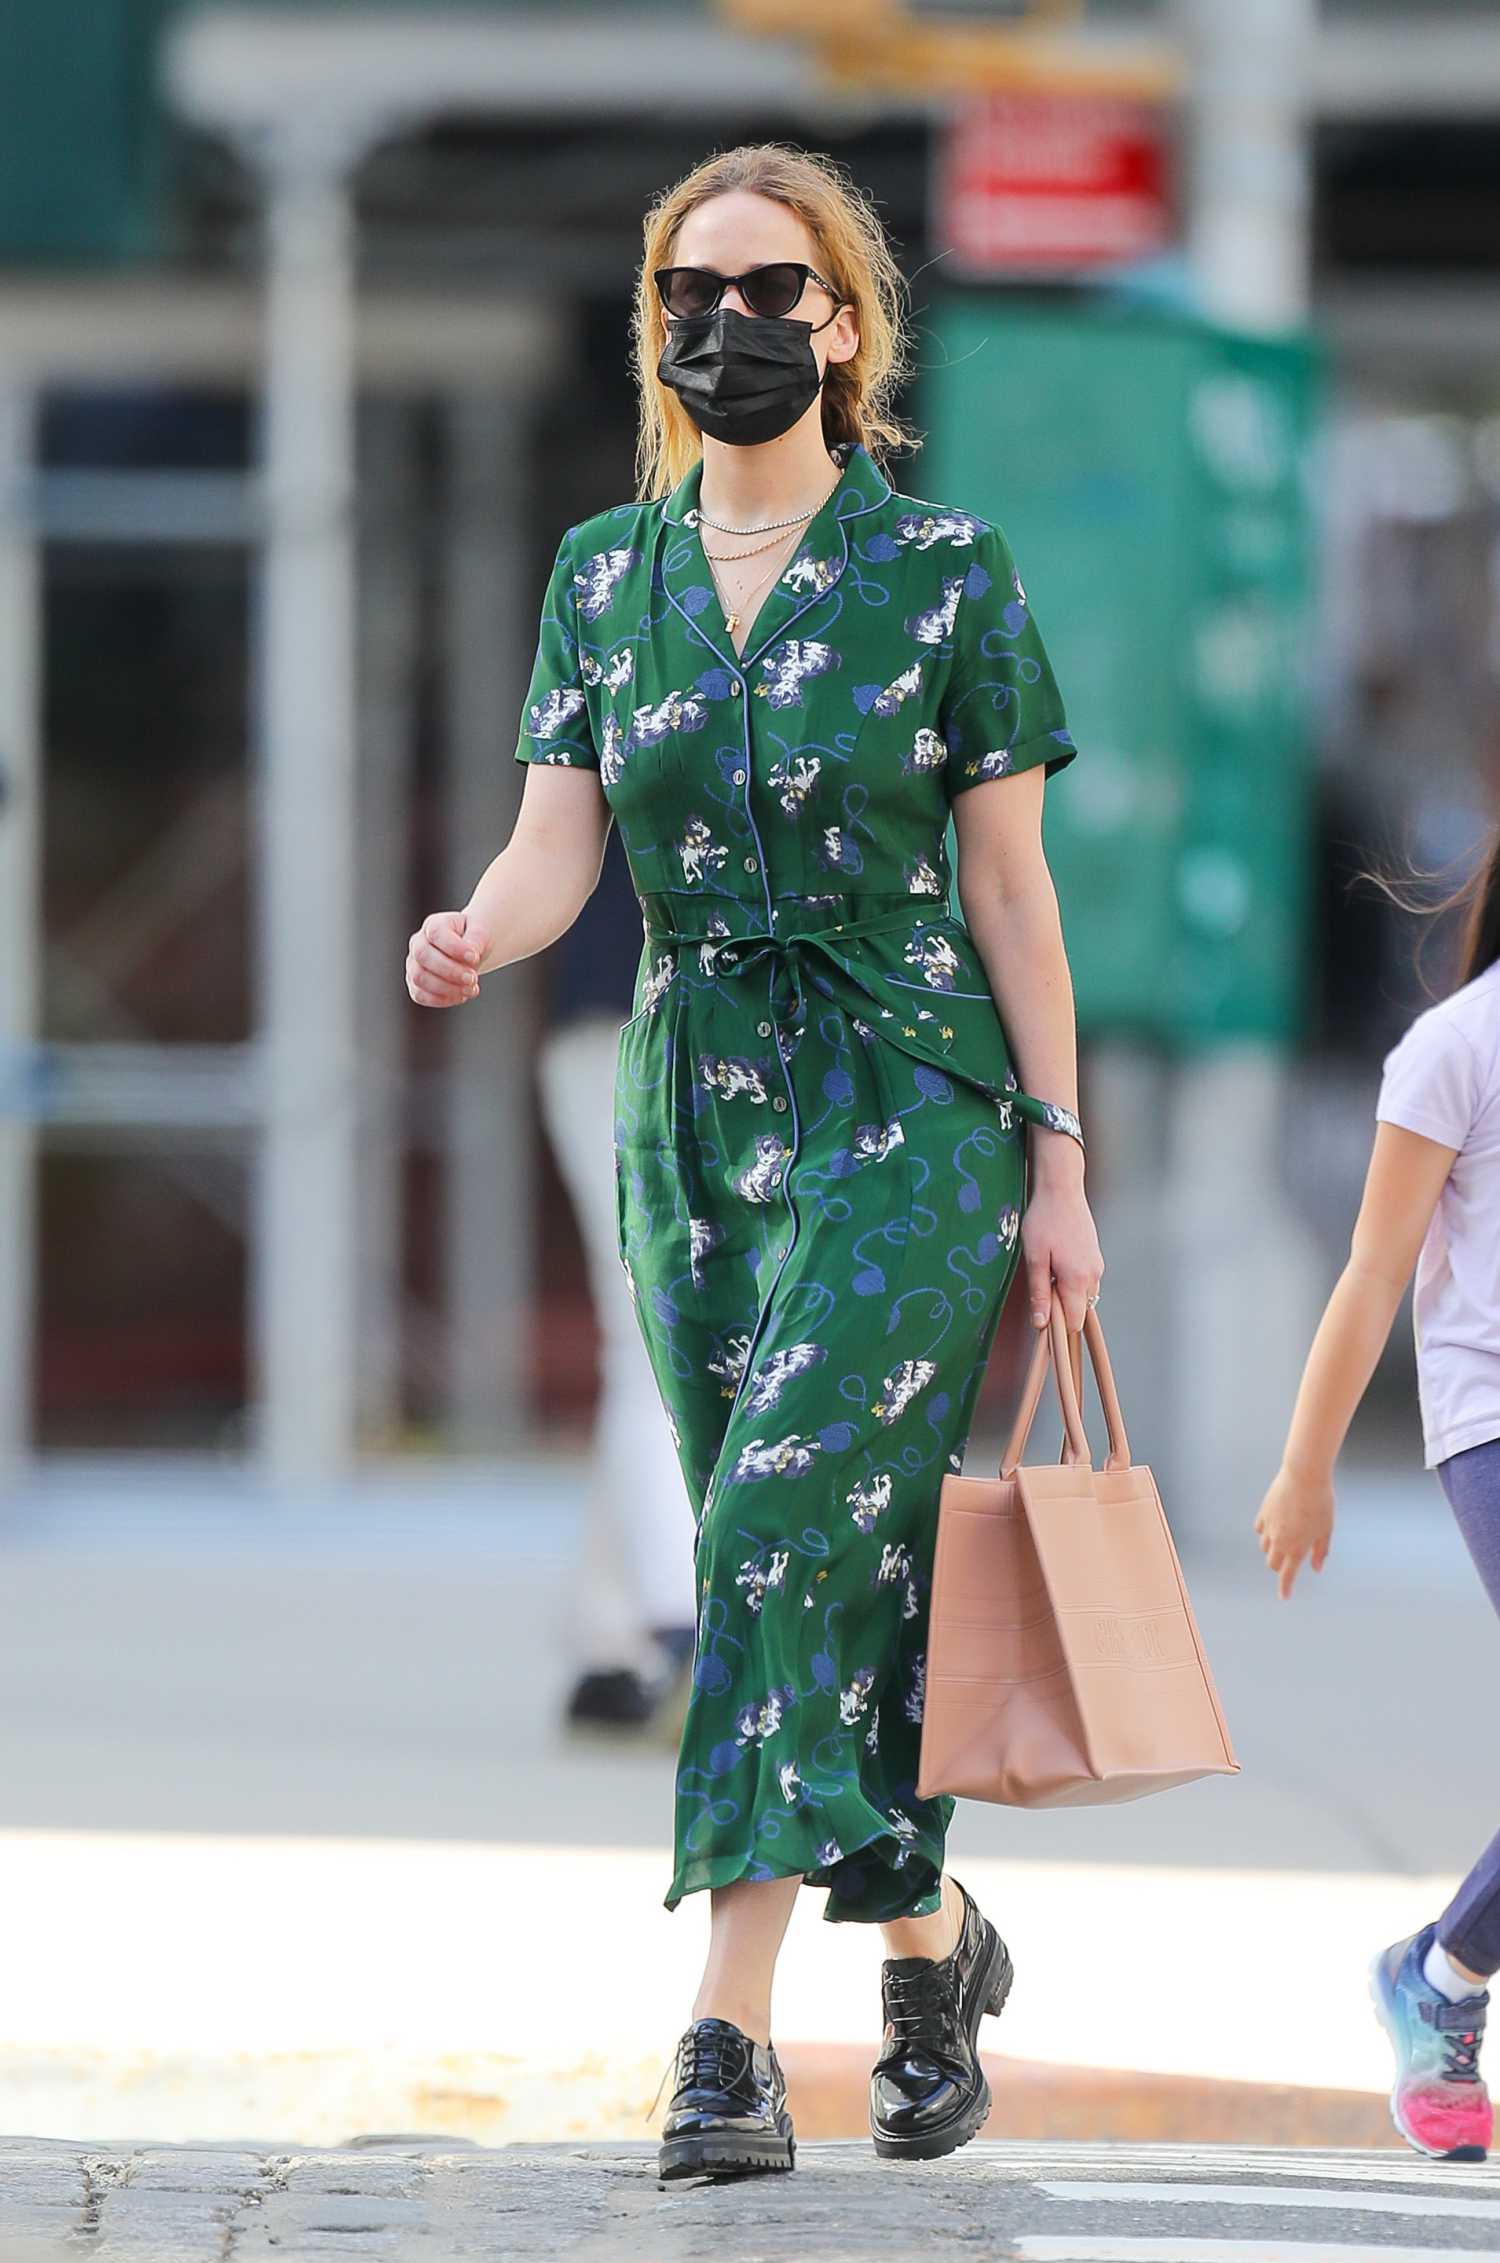 Jennifer Lawrence in a Green Dress Was Spotted Out in Tribeca, New York ...